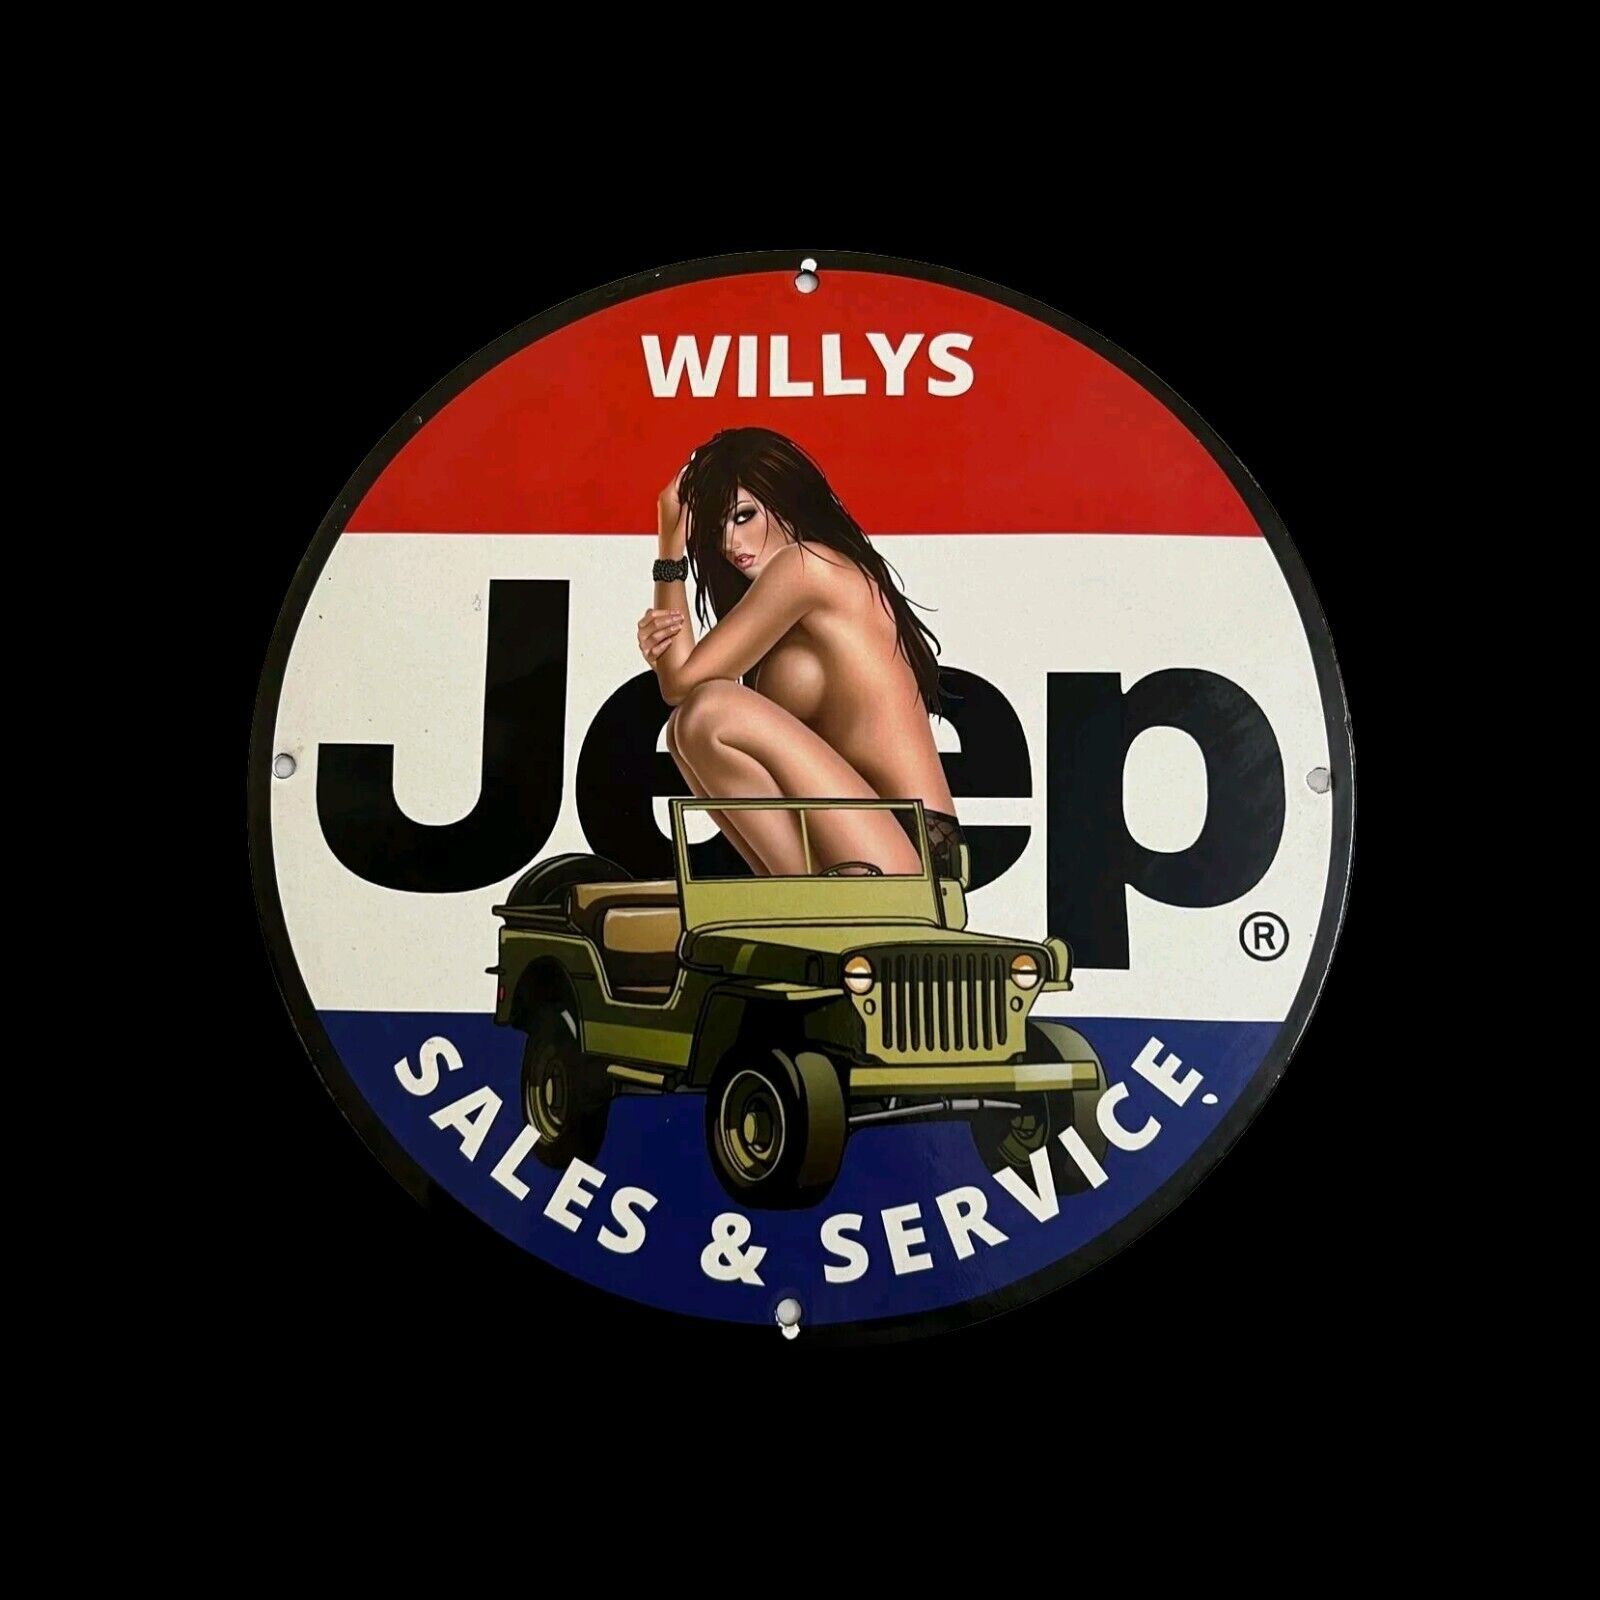 WILLYS JEEP SALES & SERVICES NAKED PINUP GIRL GARAGE GAS OIL PUMP PORCELAIN SIGN